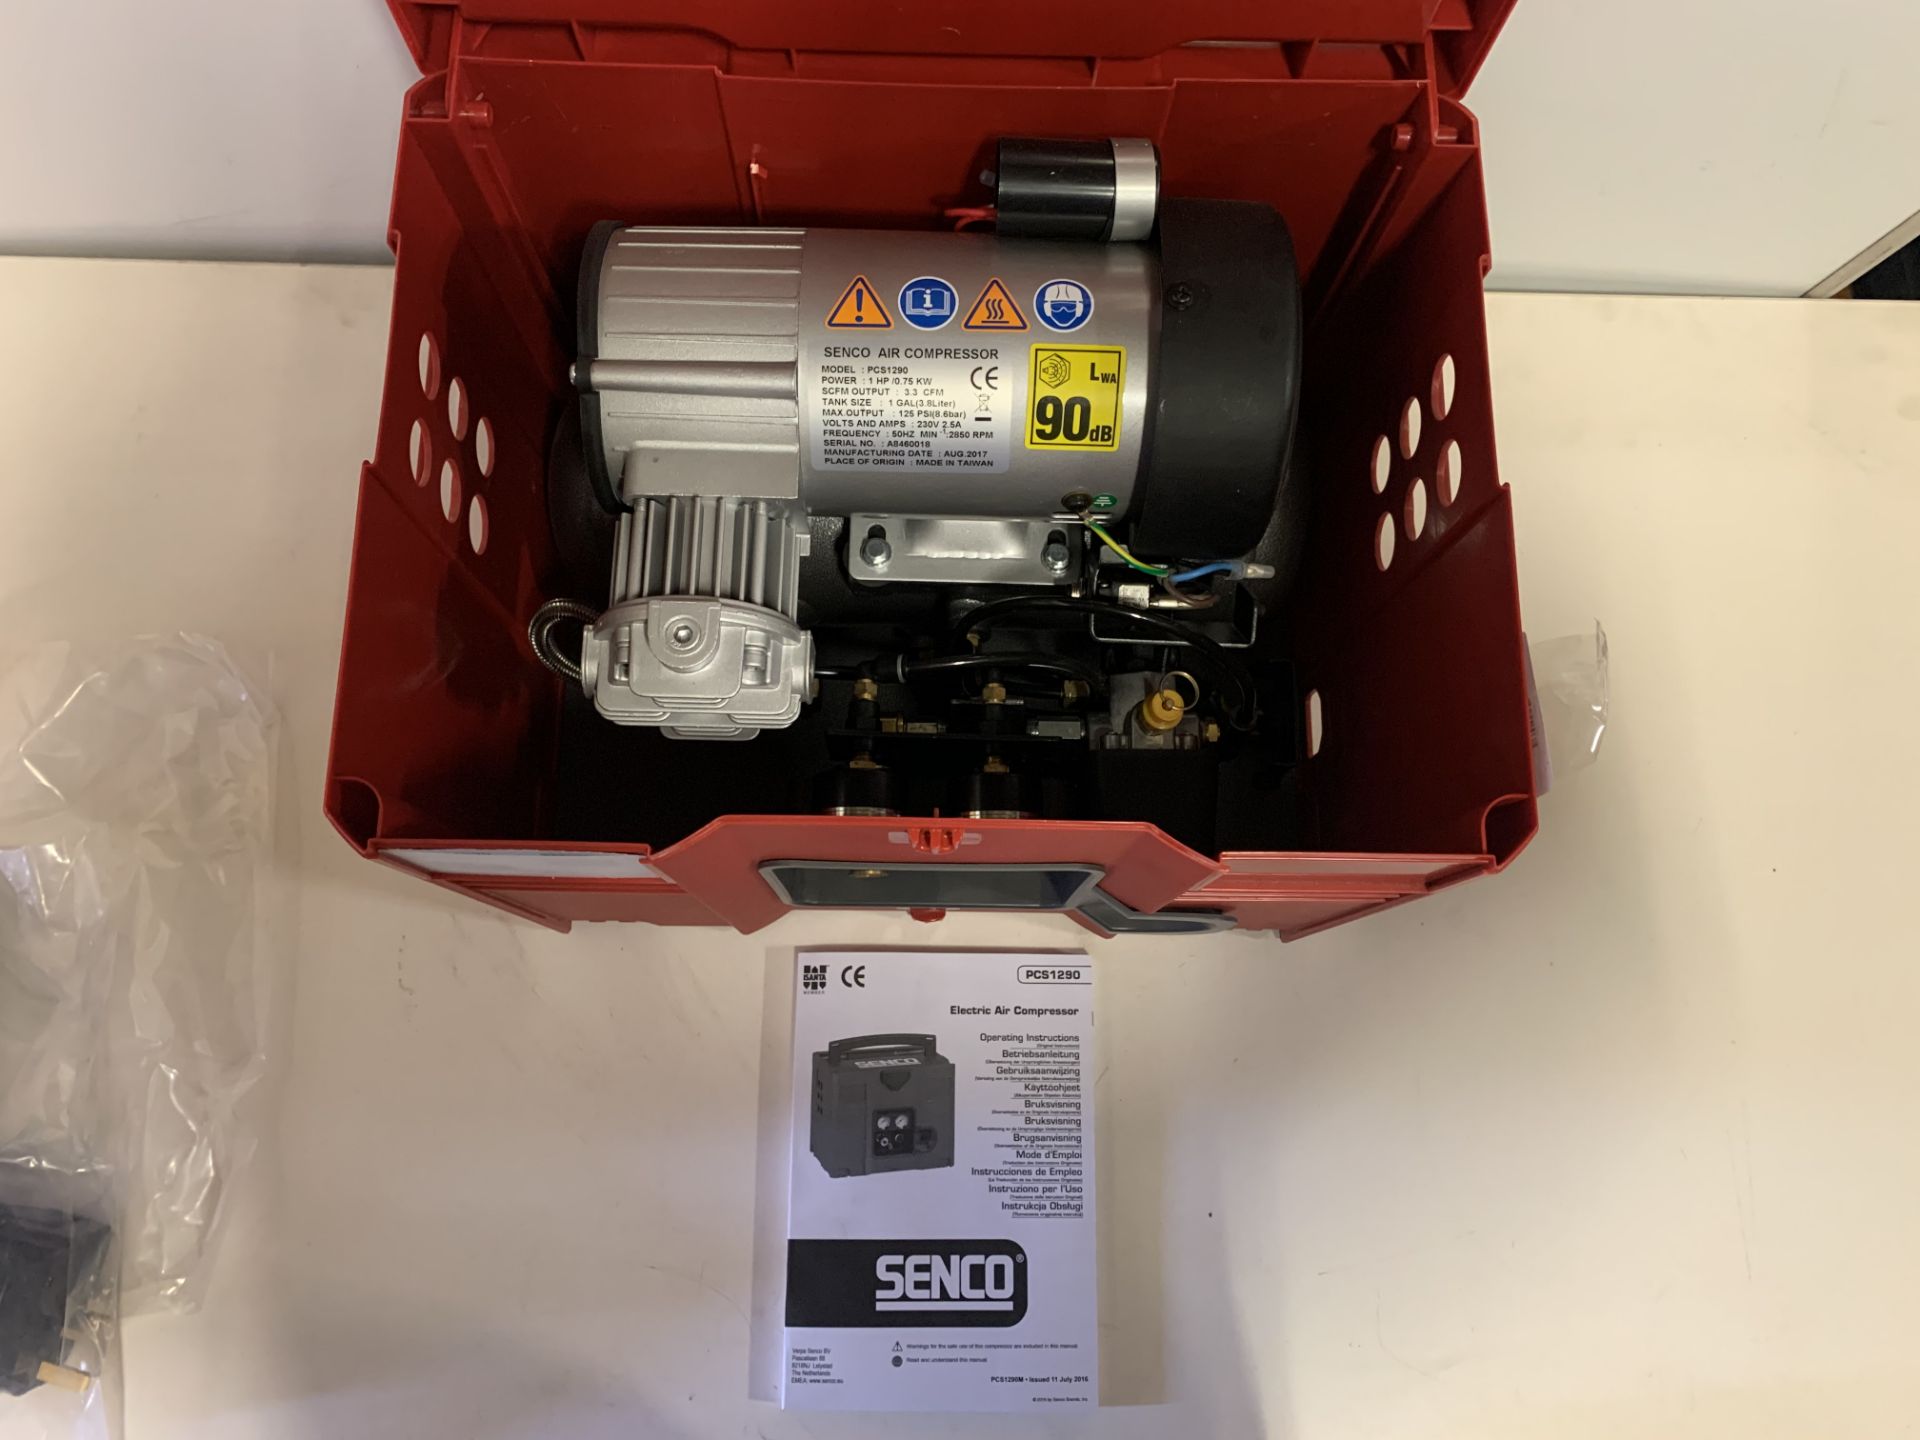 Senco Air Compressor in Systainer Form Fits Festool Systainer - 230V - Image 6 of 7